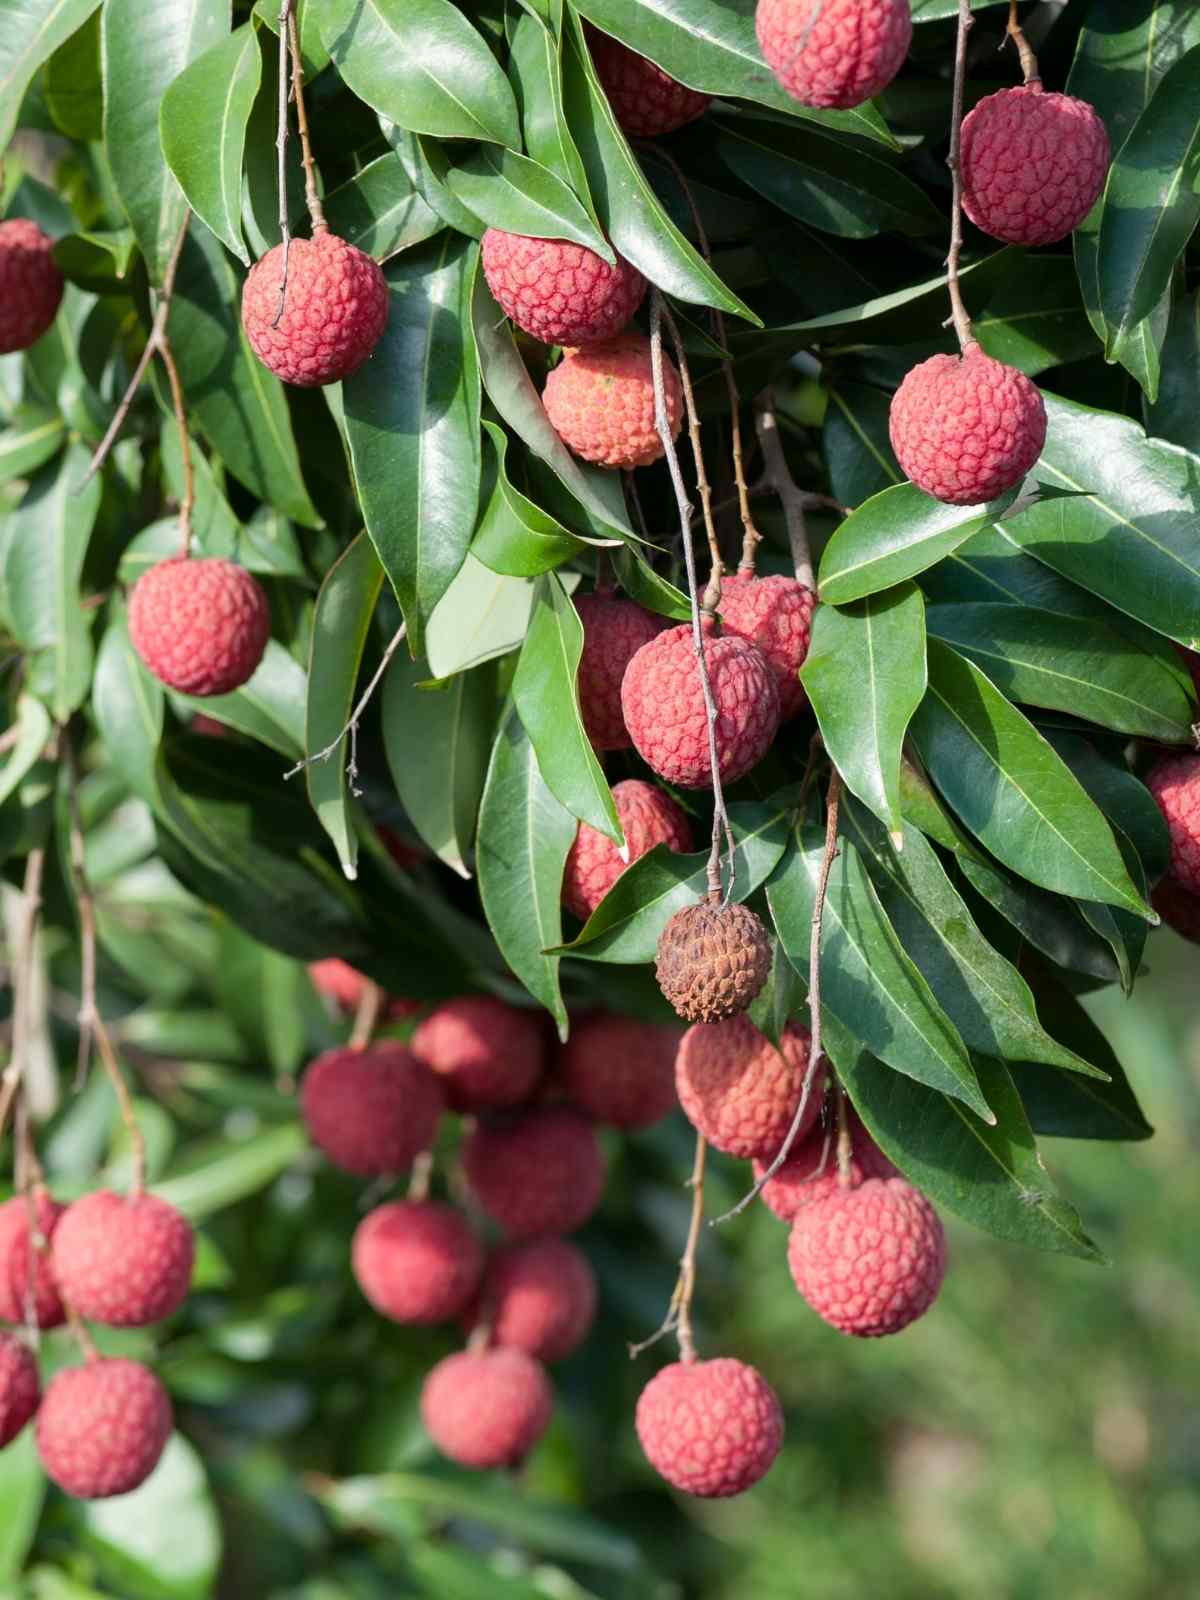 How to Grow Lychee Trees